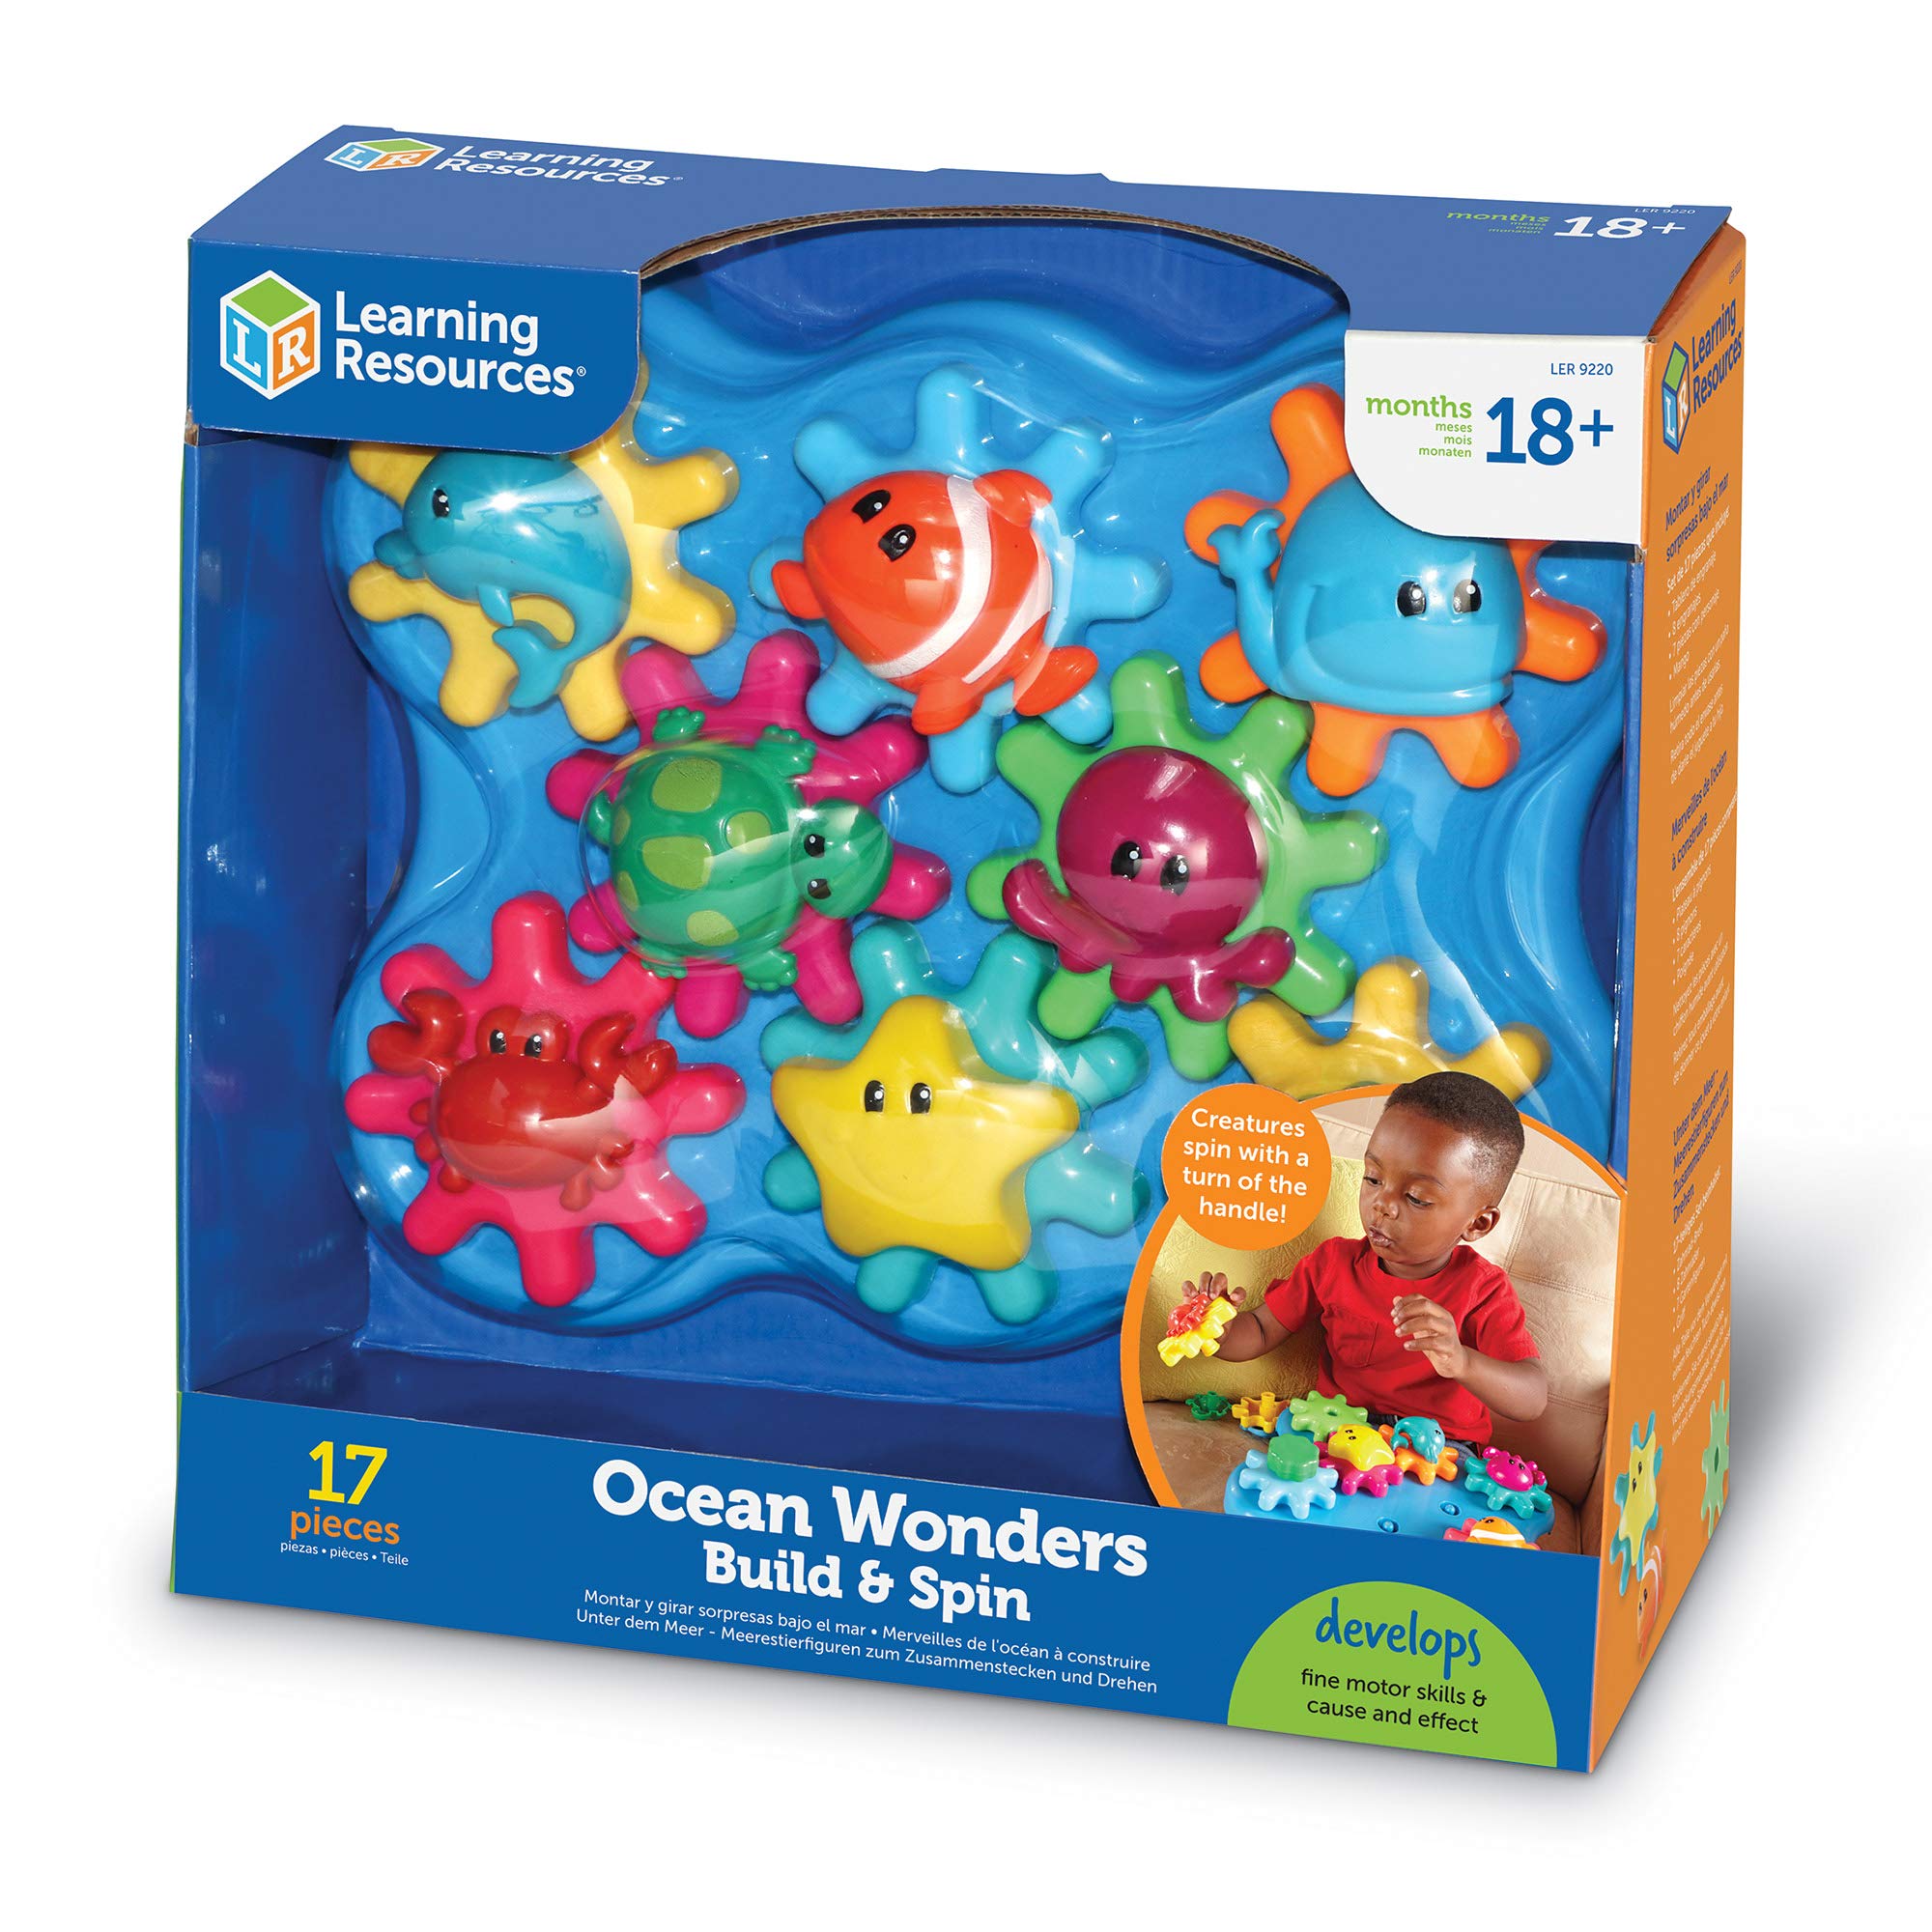 Learning Resources Ocean Wonders Build & Spin, Gears Toy & Building Set, 17 Pieces, Ages 18+ months